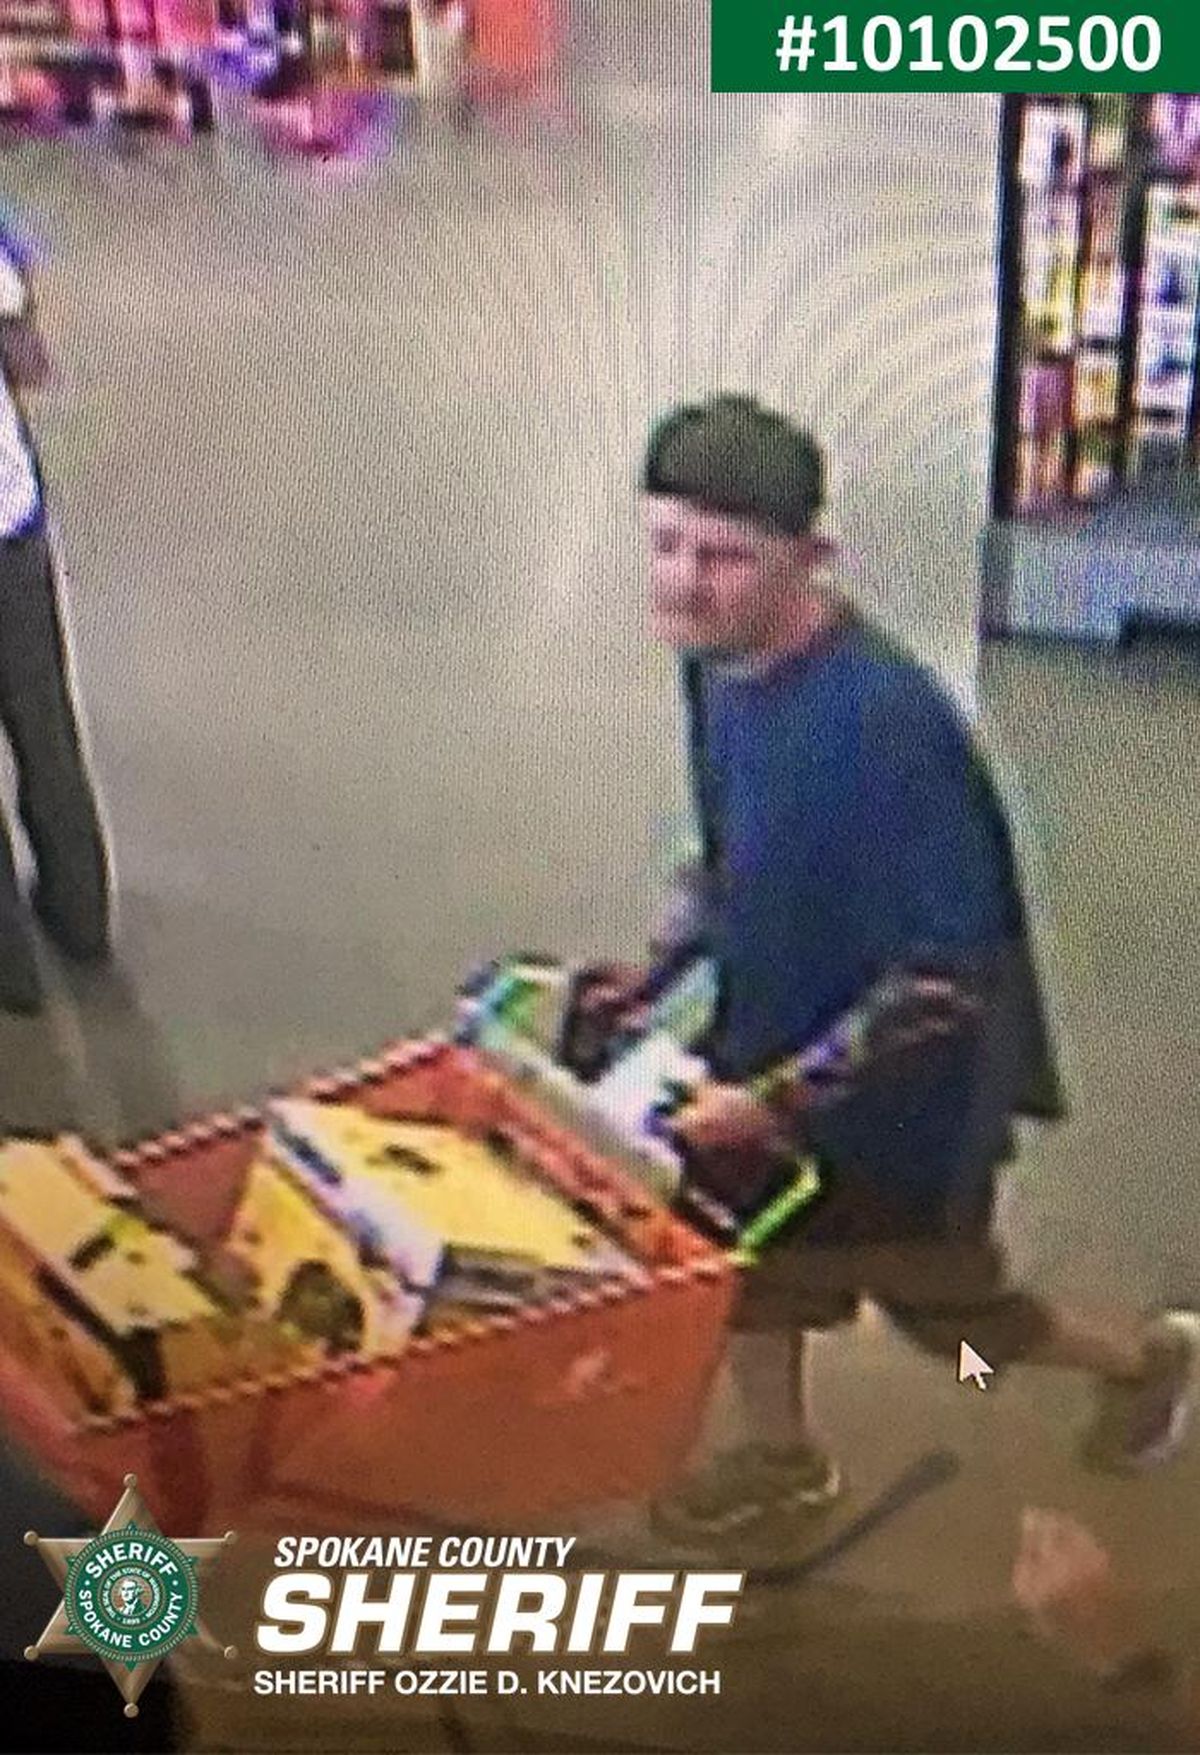 Video surveillance shows the suspect using the cards at stores in Liberty Lake.